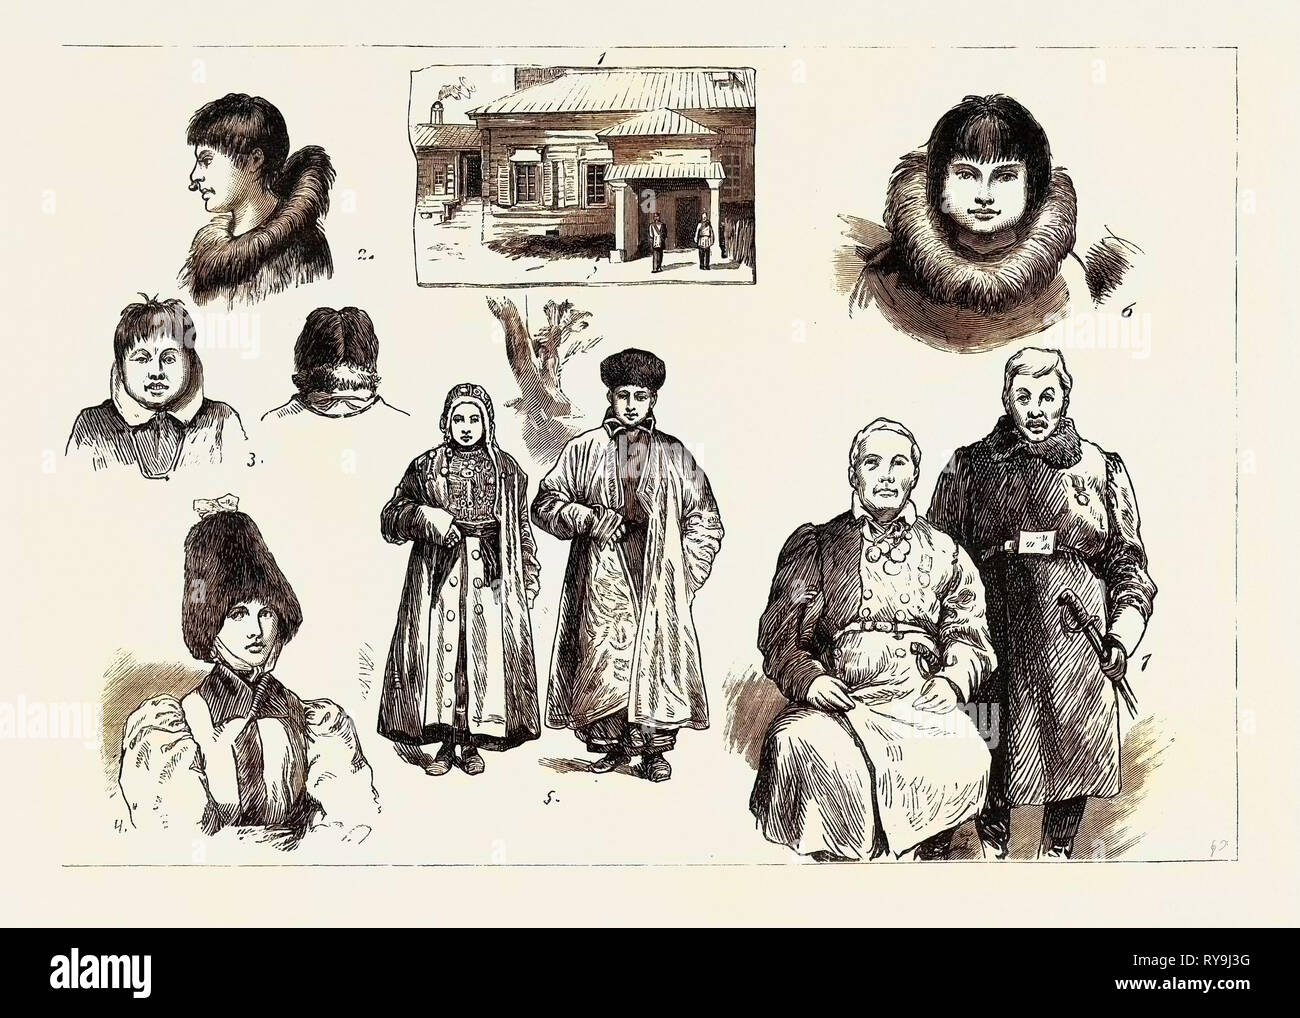 Life and Character in Western Siberia: 1. Governor's House, Jakutsk, Siberia, 2. Girl, St. Michael's, 3. Woman from Cape Stevens (Back and Front View), 4. Woman of Jakutsk, 5. Bashkeer Man and Wife, 6. Young Man, St. Michael's, 7. Wealthy Magnates of Jakutsk Stock Photo